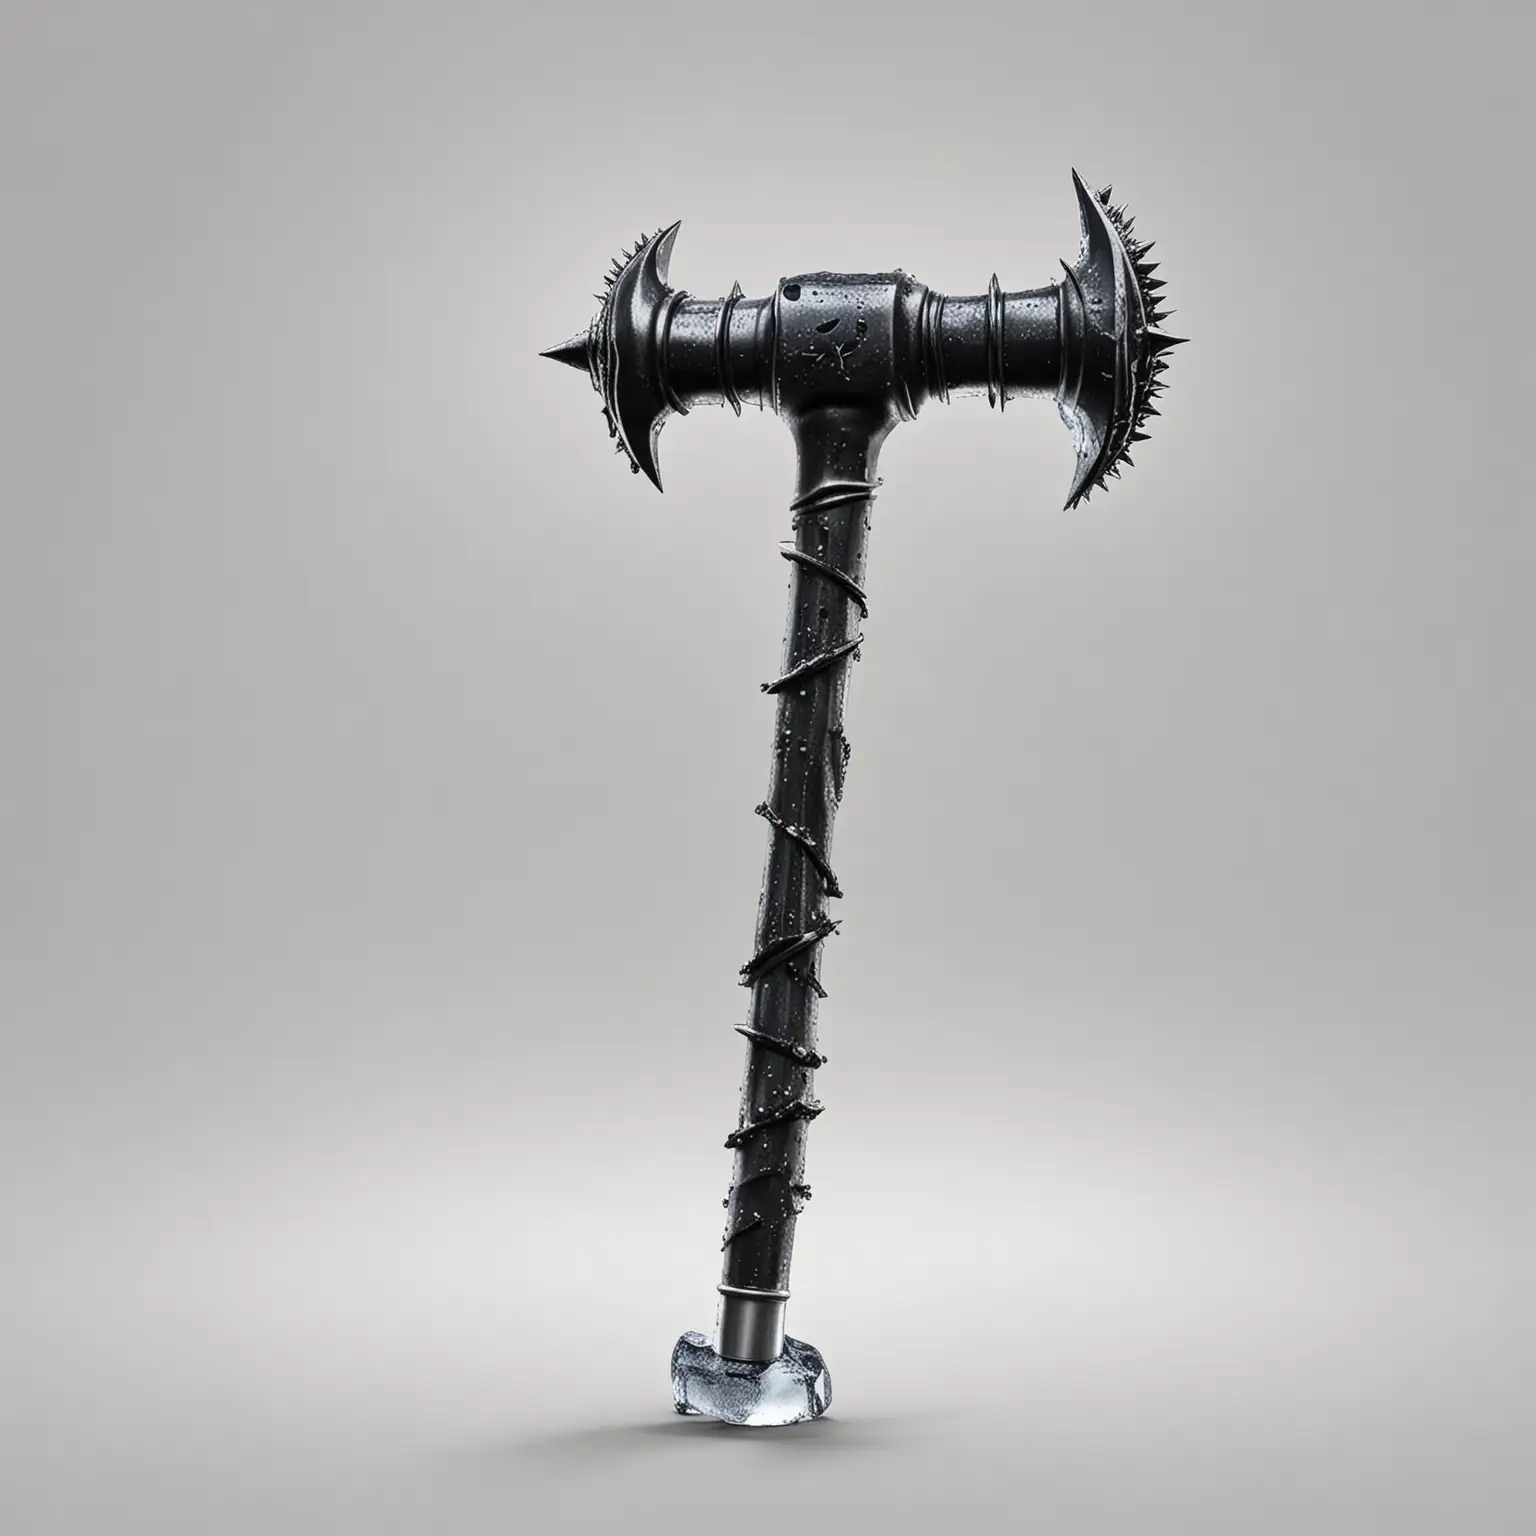 Realistic-Hammer-with-Long-Steel-Handle-and-Black-Spikes-on-White-Background